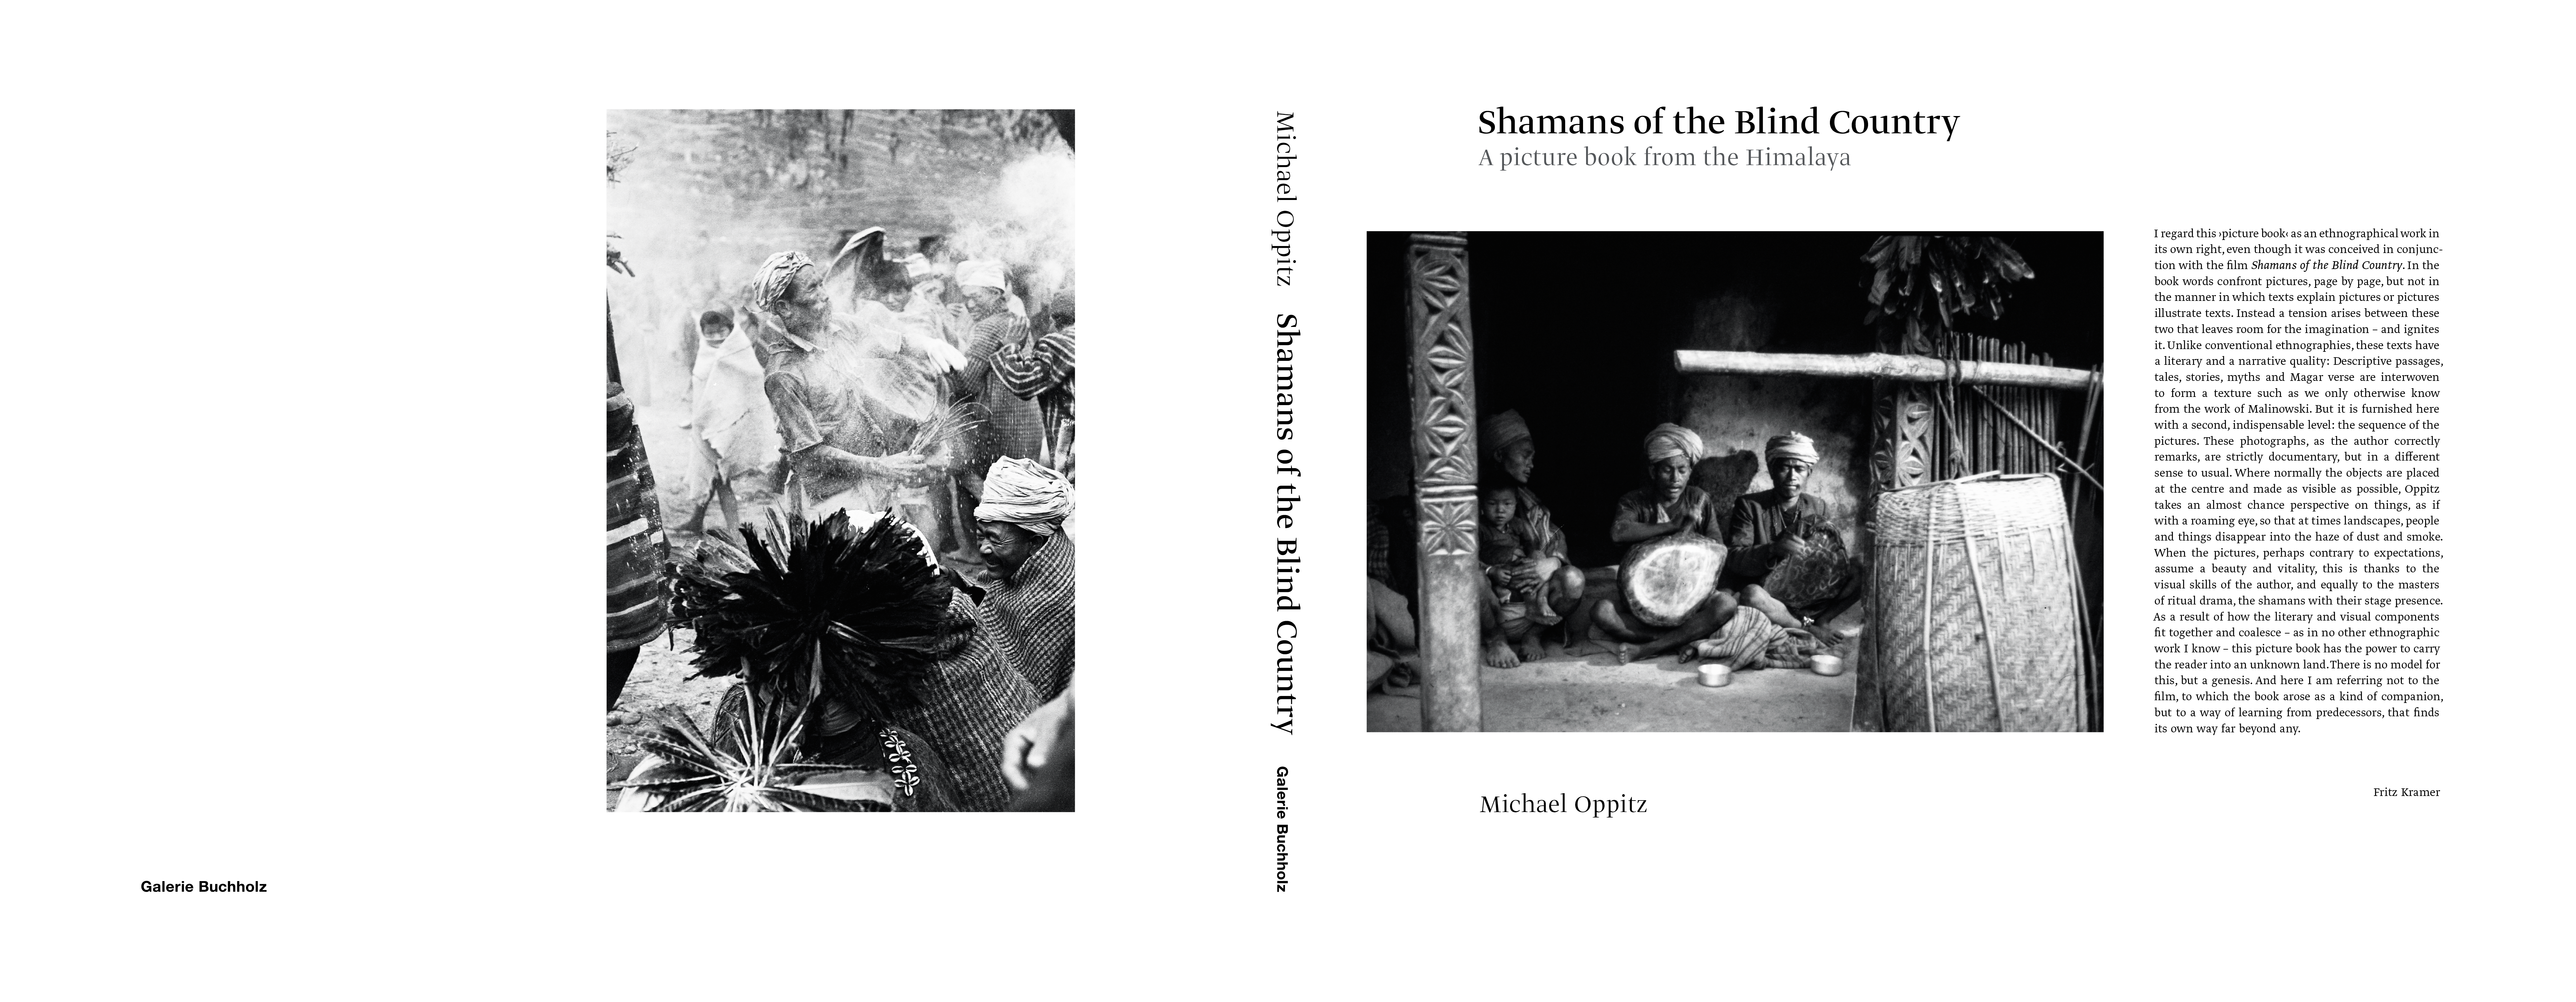 Galerie Buchholz | Michael Oppitz – Shamans of the Blind Country – Cover